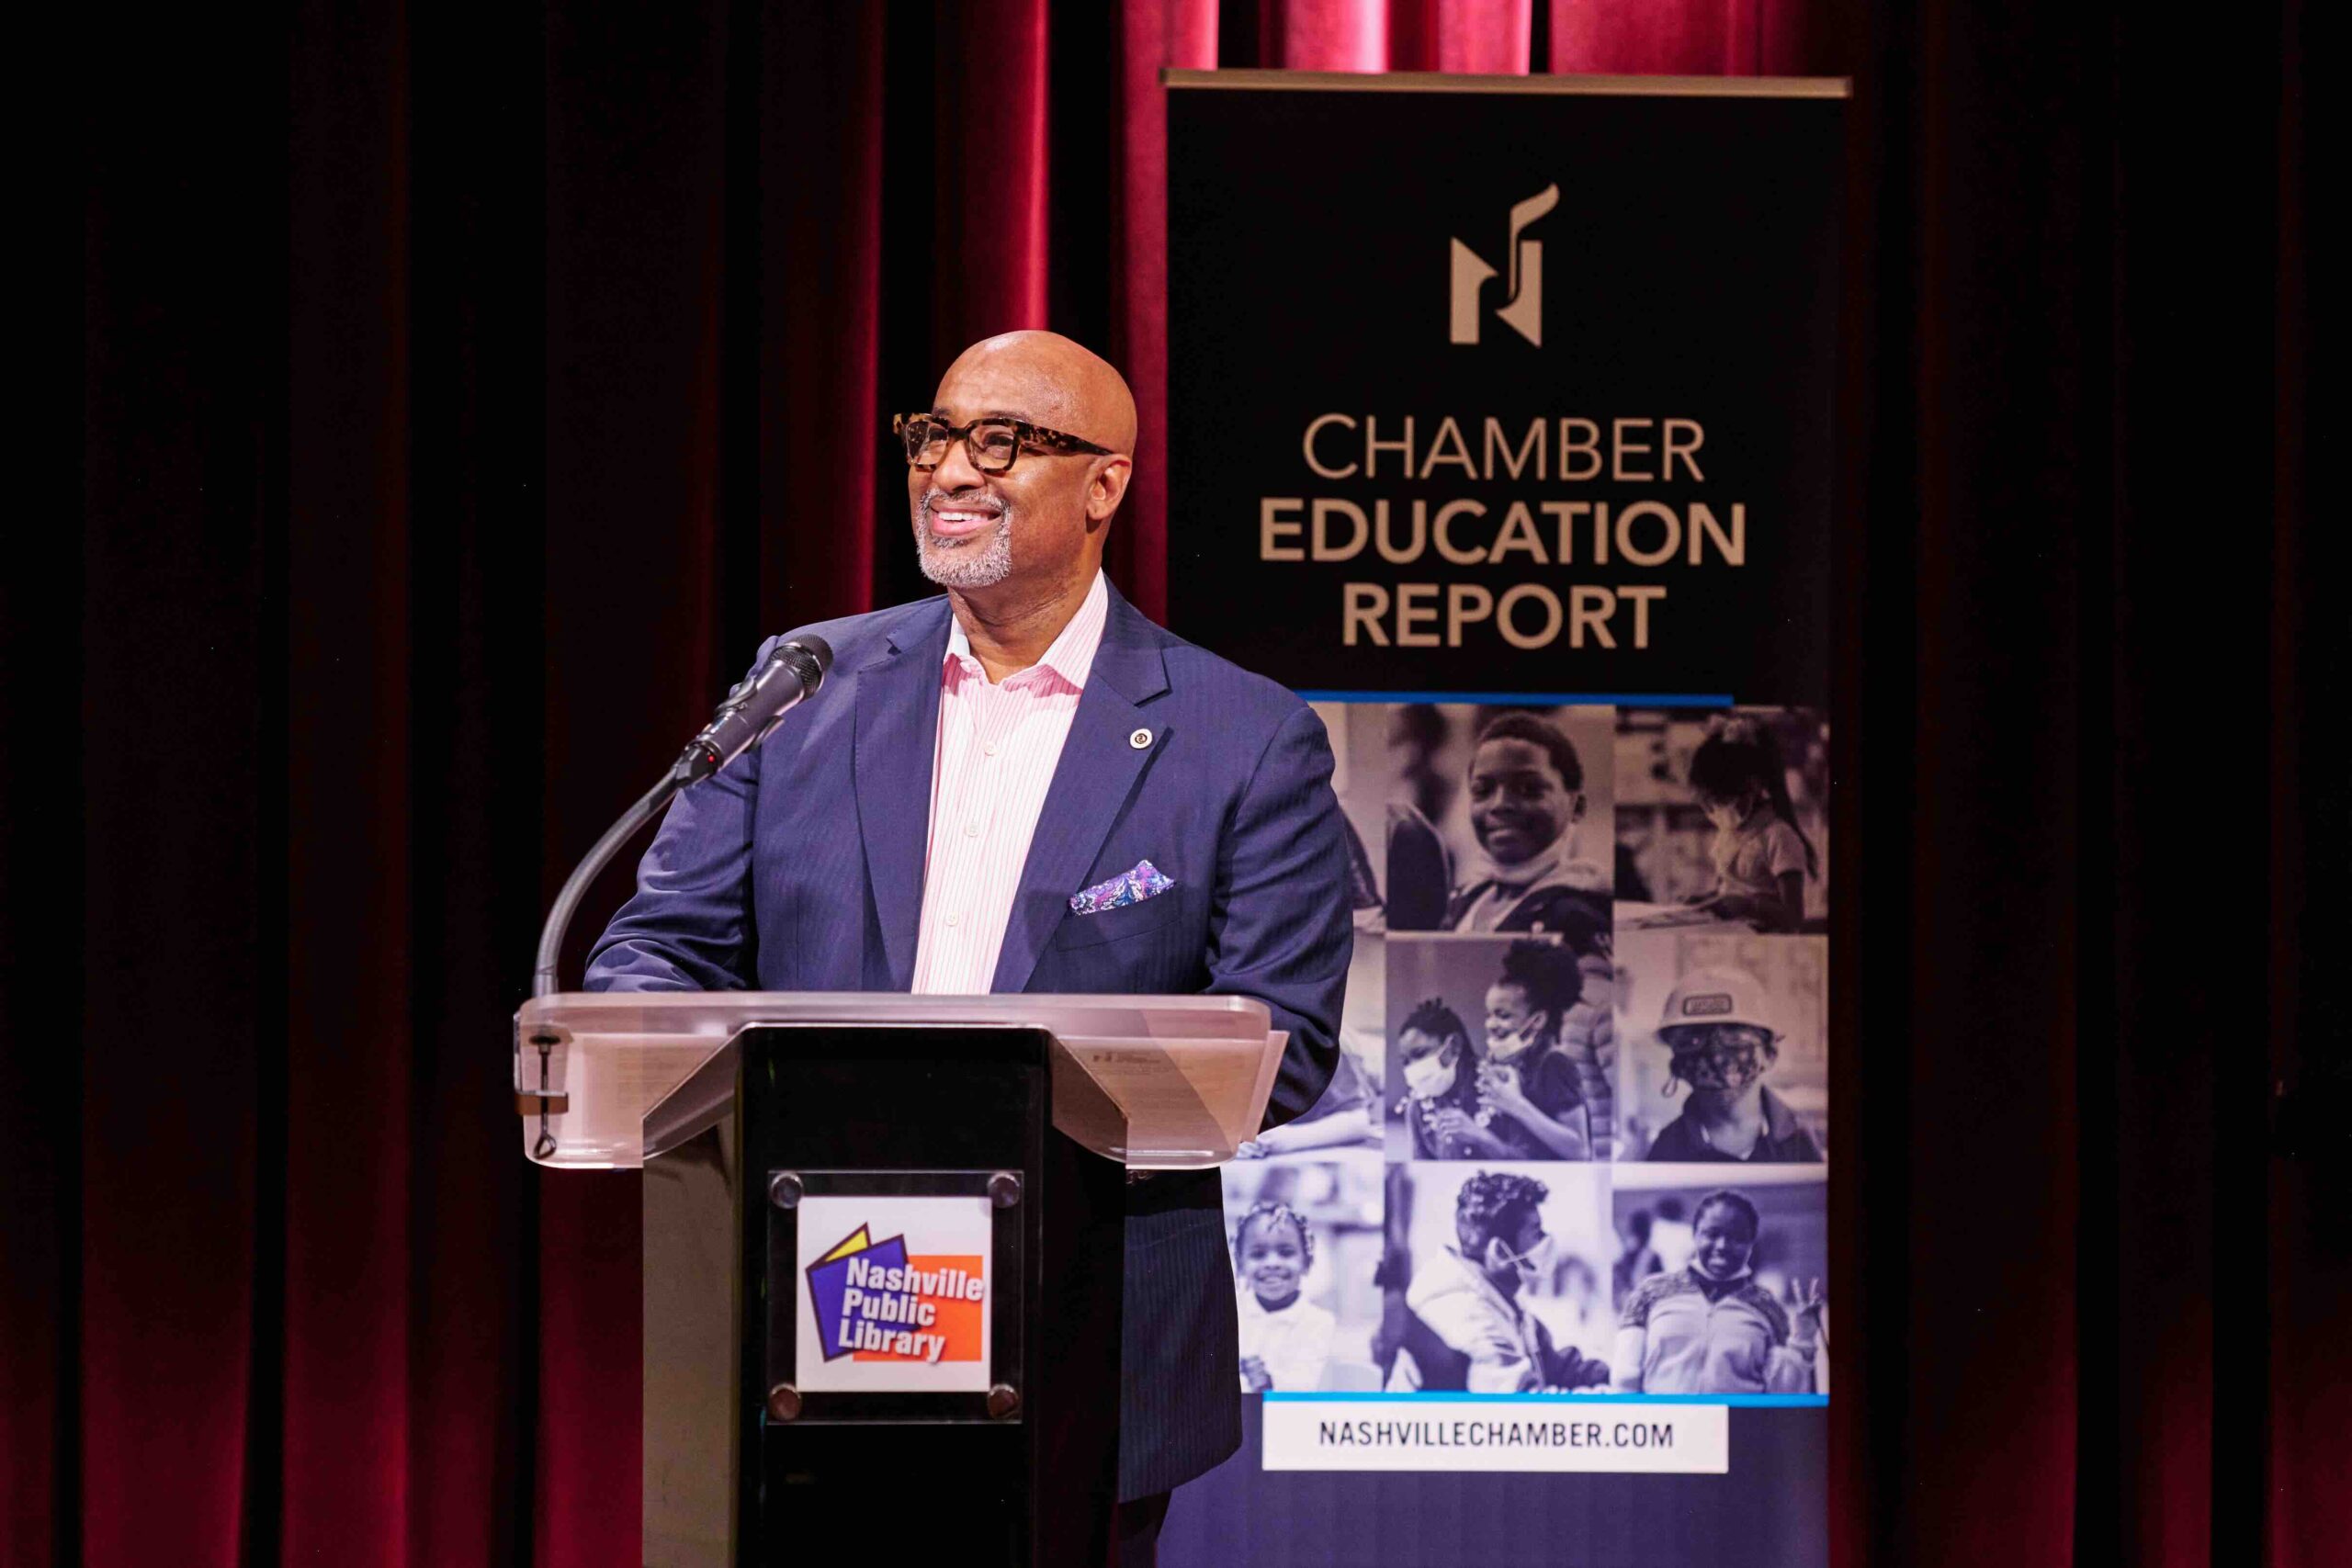 A confident speaker addressing an audience from a podium at an event focused on education, hosted by the nashville chamber, as indicated by the banner beside him.